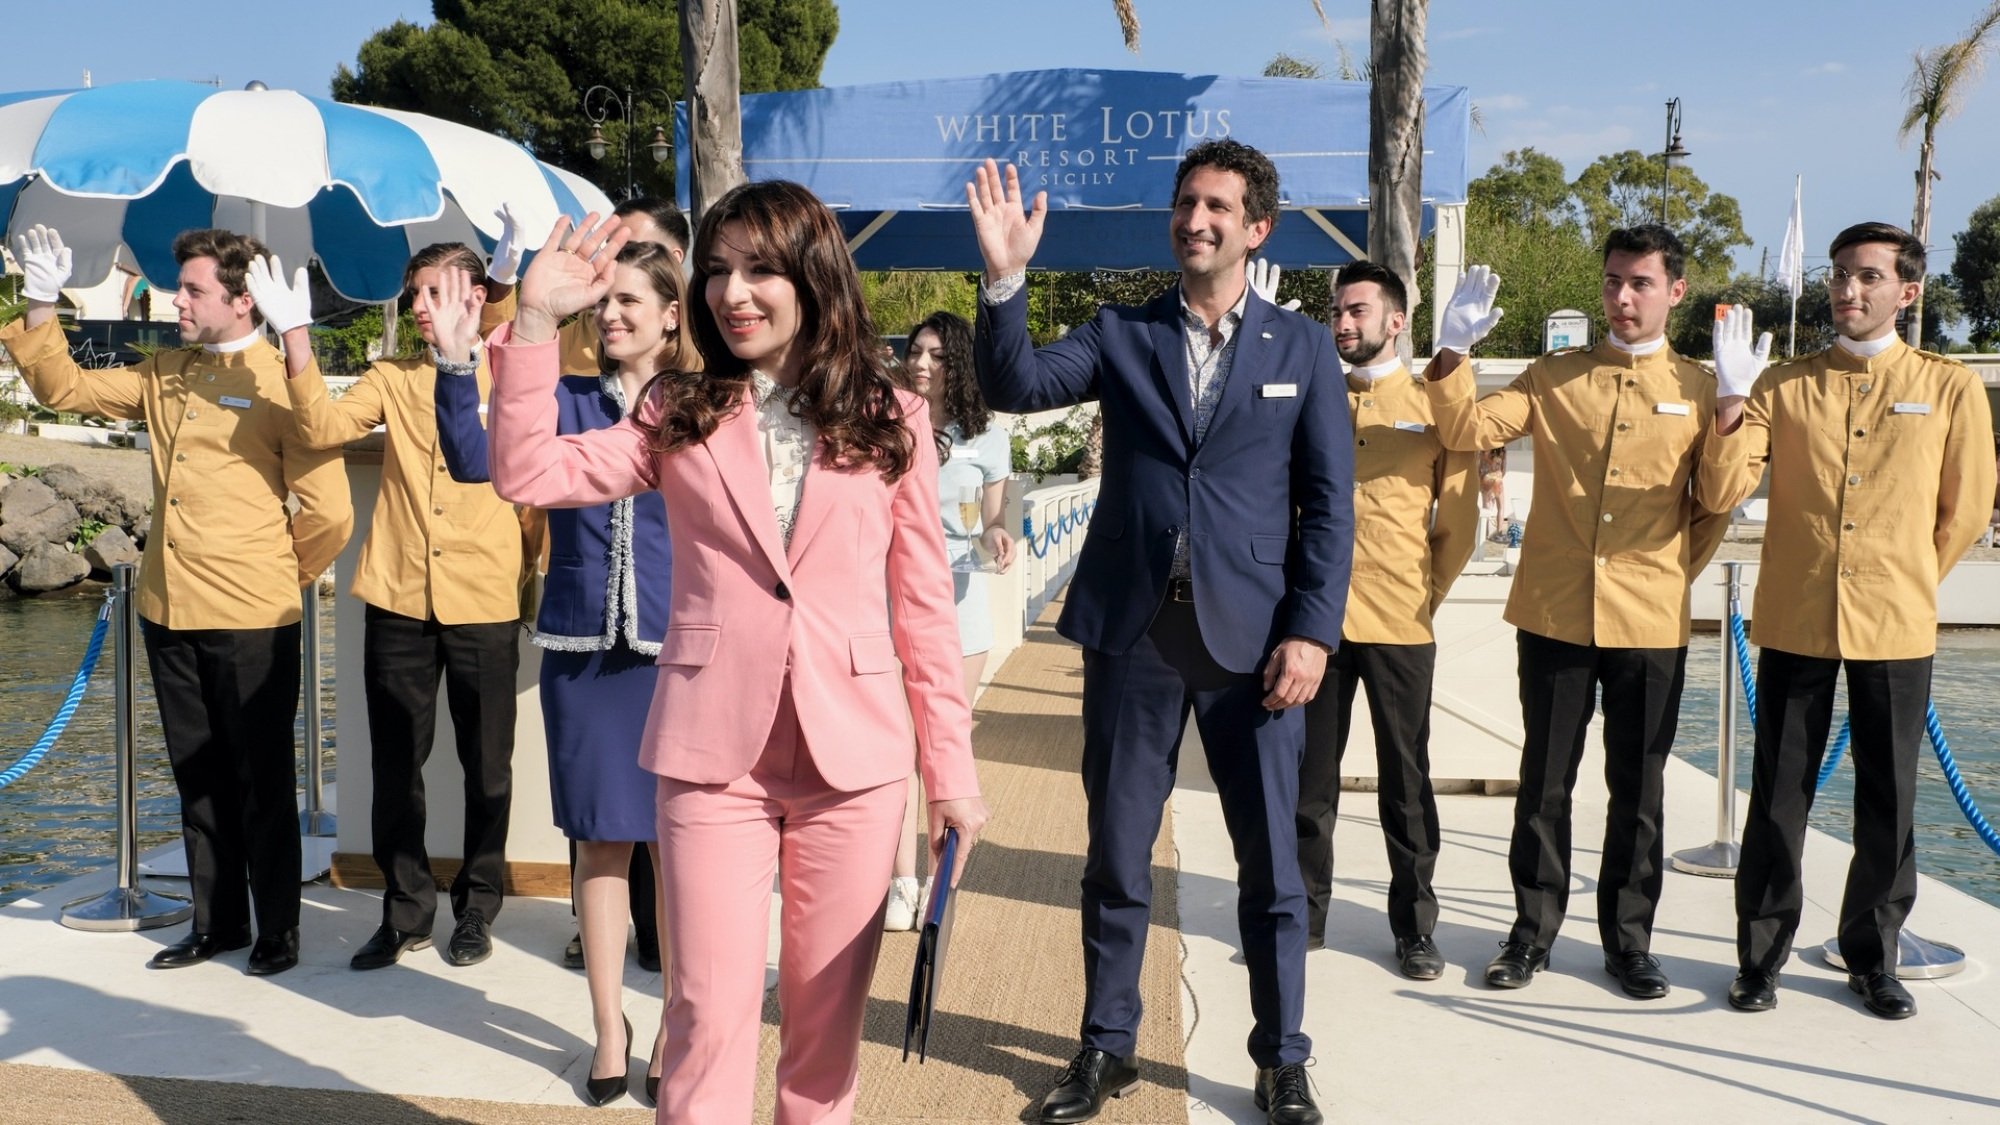 A woman in a pink suit and a group of hotel staff in yellow blazers stand on a dock, waving.